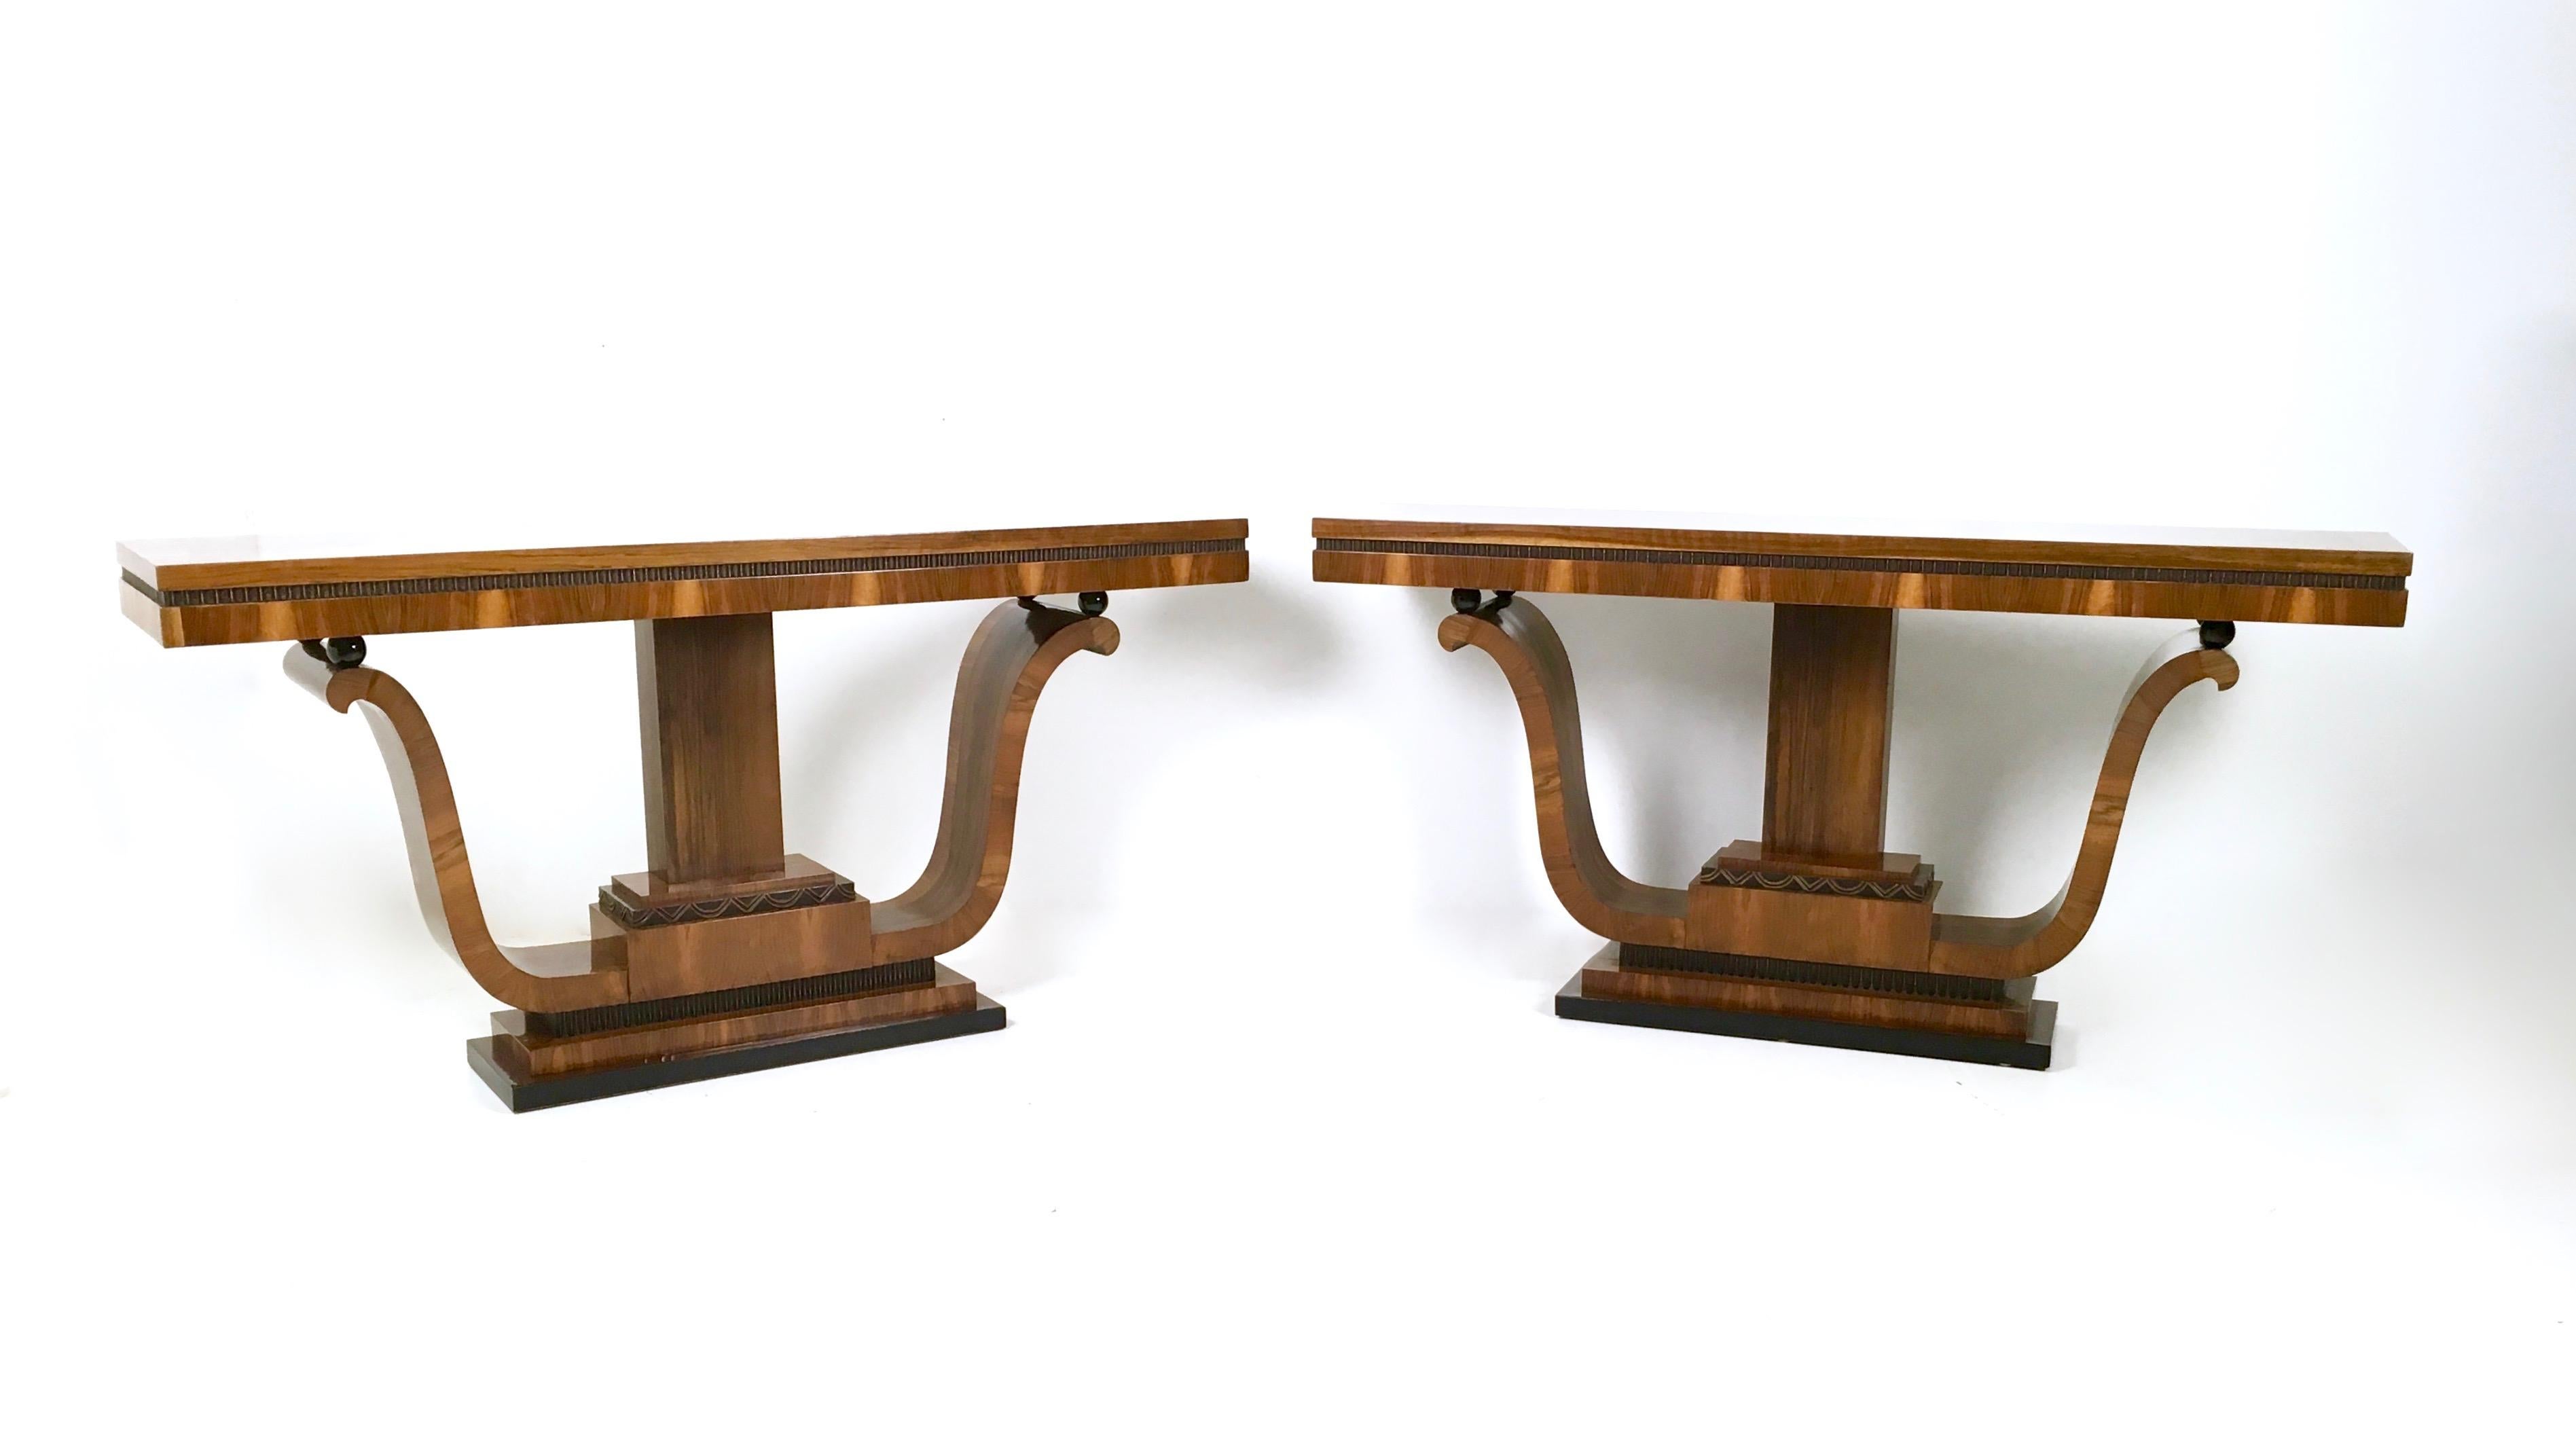 They are made in walnut and feature ebonized wood parts.
These two beautiful consoles have been perfectly restored and polished with shellac. 
They might show slight traces of use since they are vintage, but they can be considered as in perfect